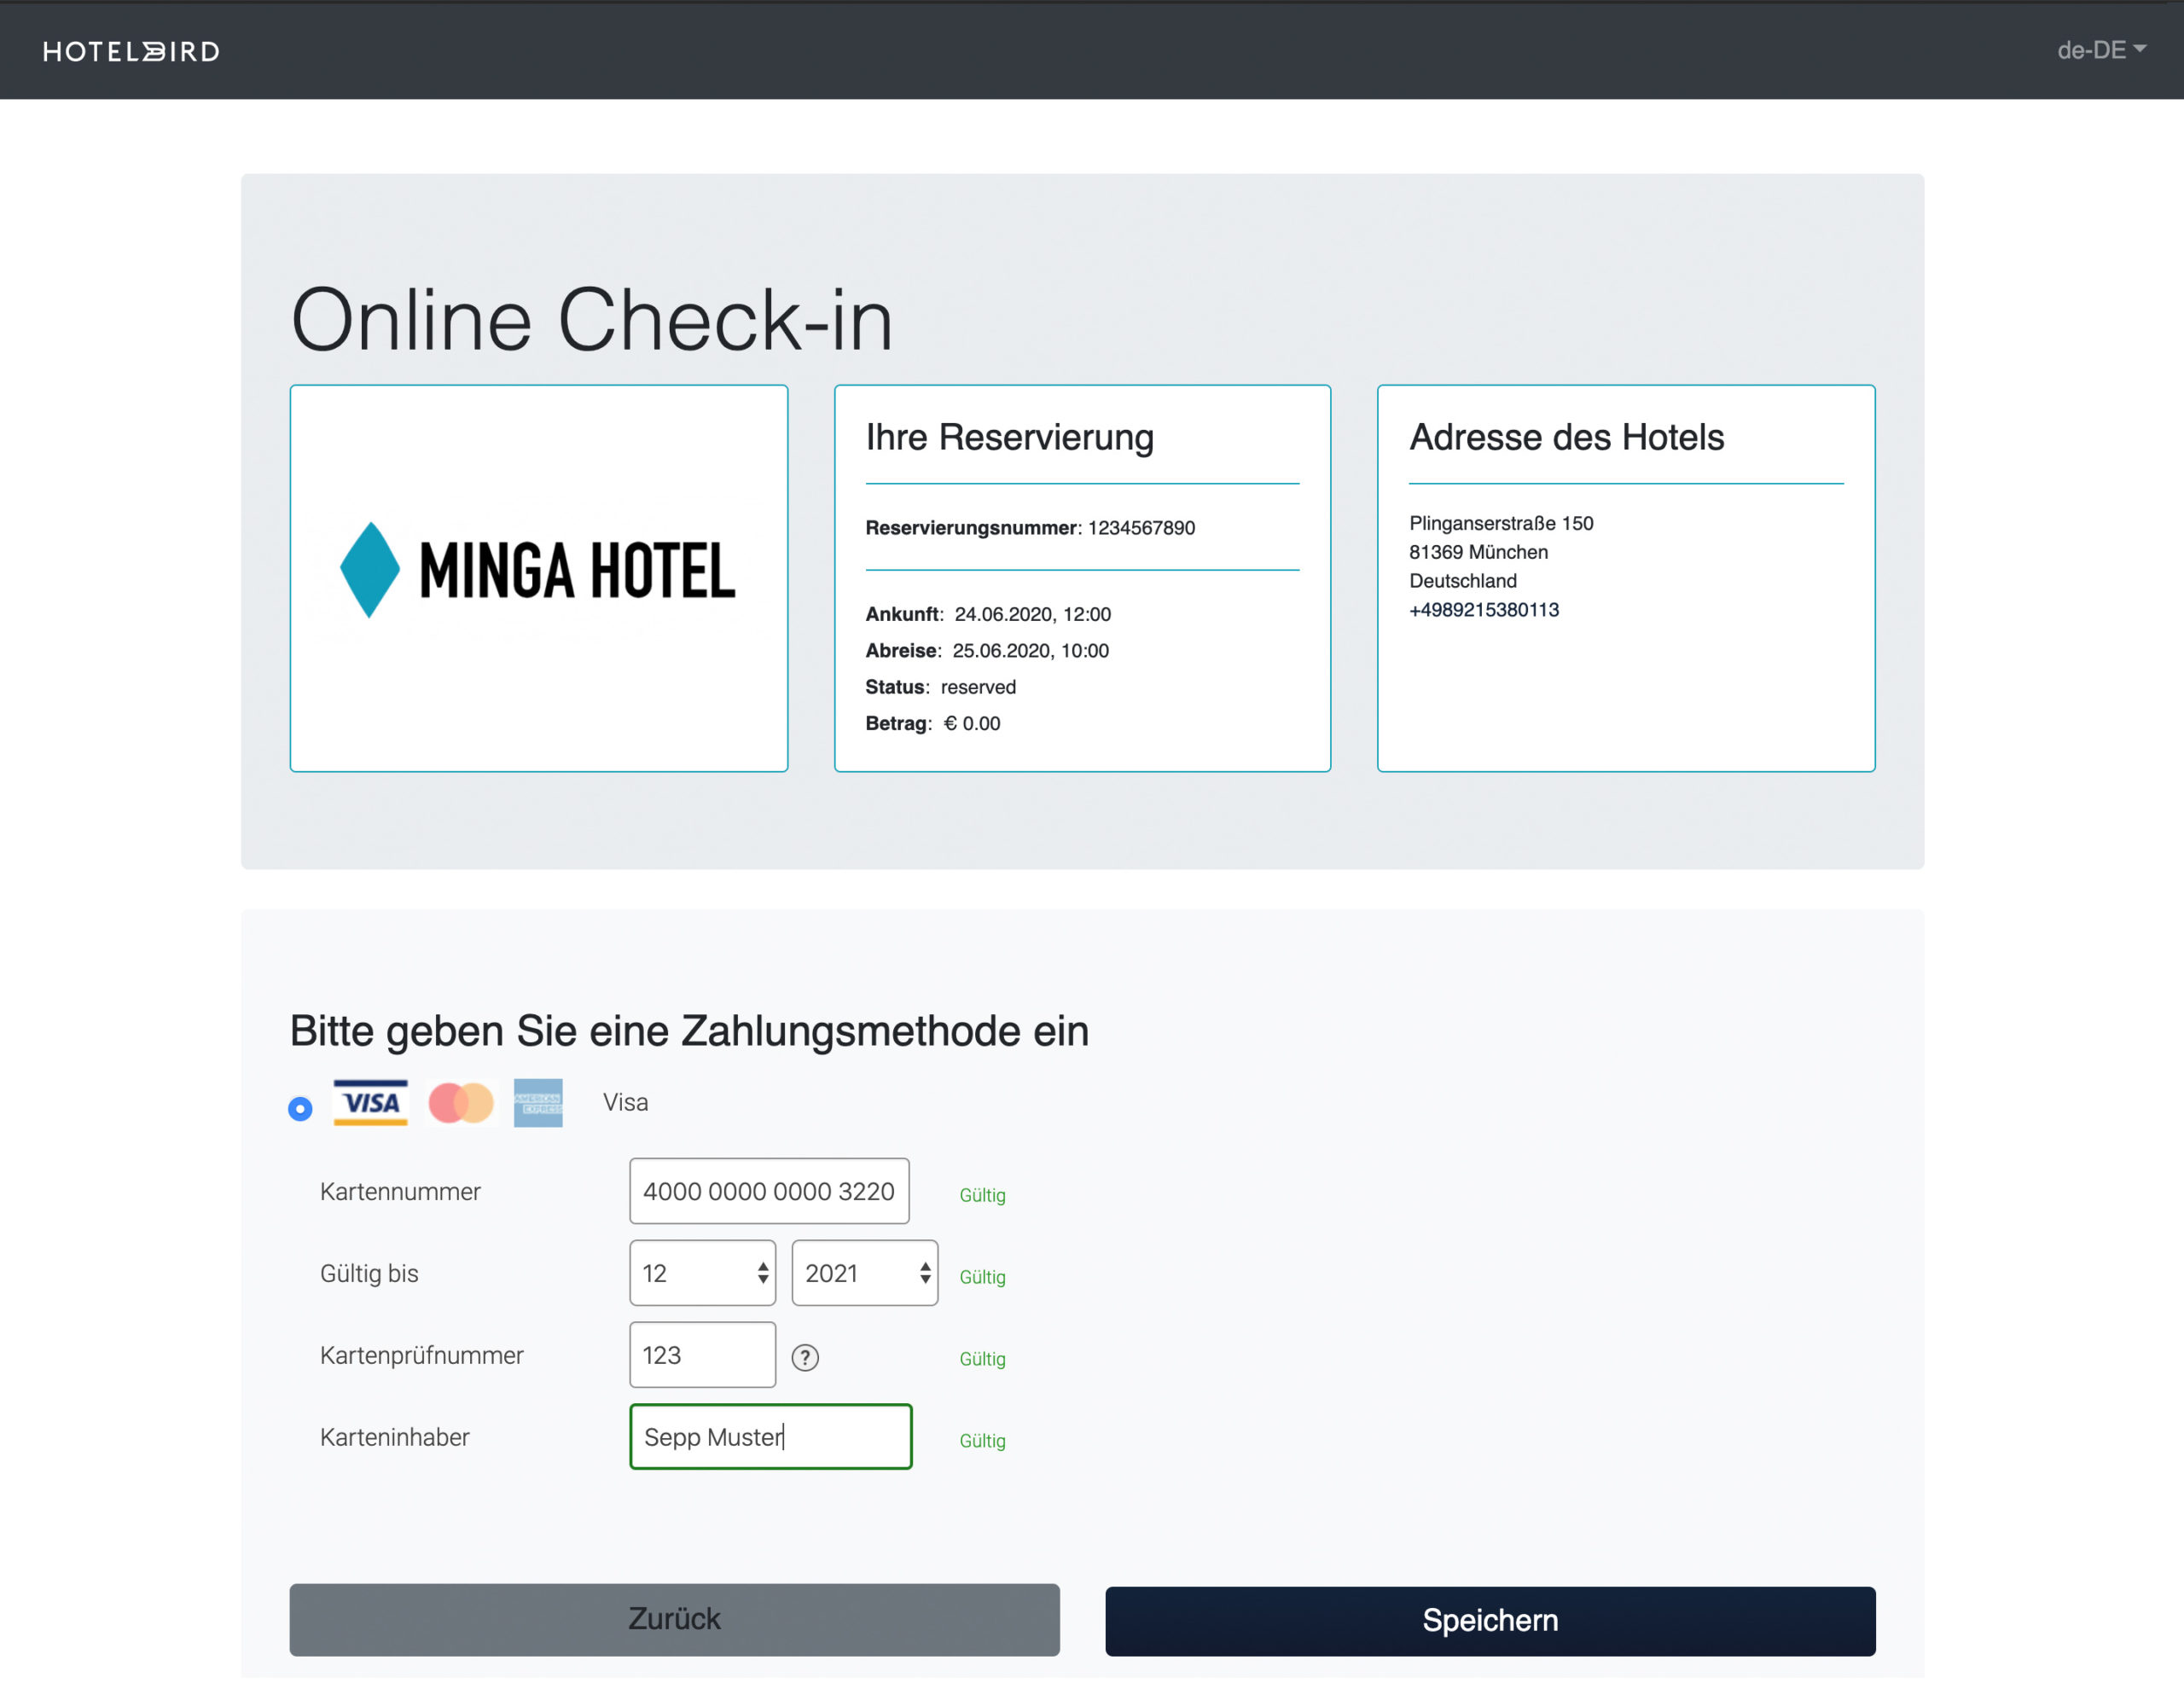 hotelbird psd2 check in 04 scaled 1 - Hotelbird GmbH